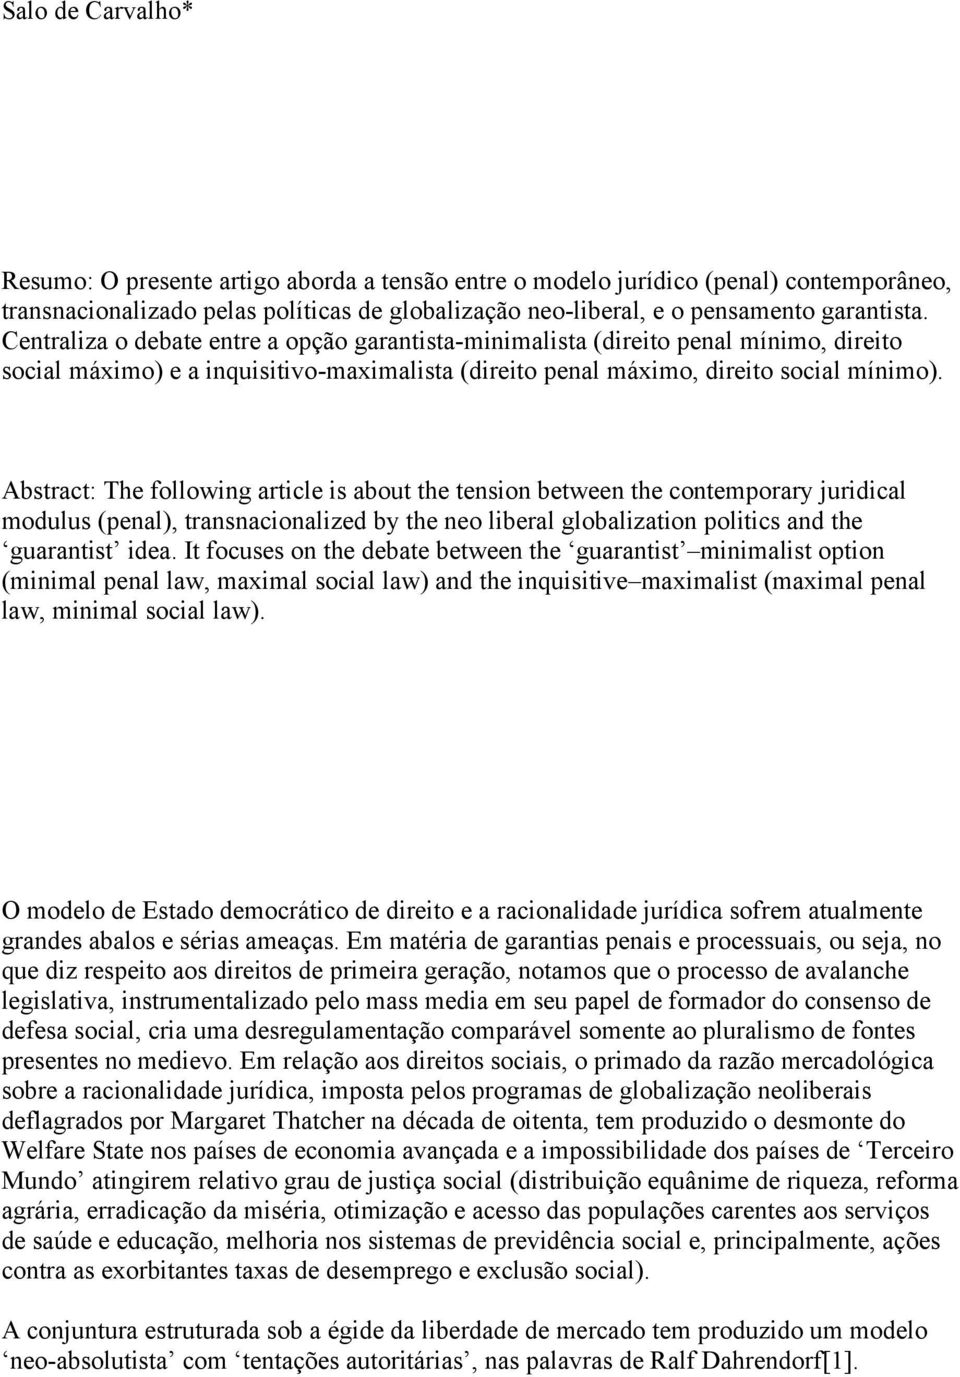 Abstract: The following article is about the tension between the contemporary juridical modulus (penal), transnacionalized by the neo liberal globalization politics and the guarantist idea.